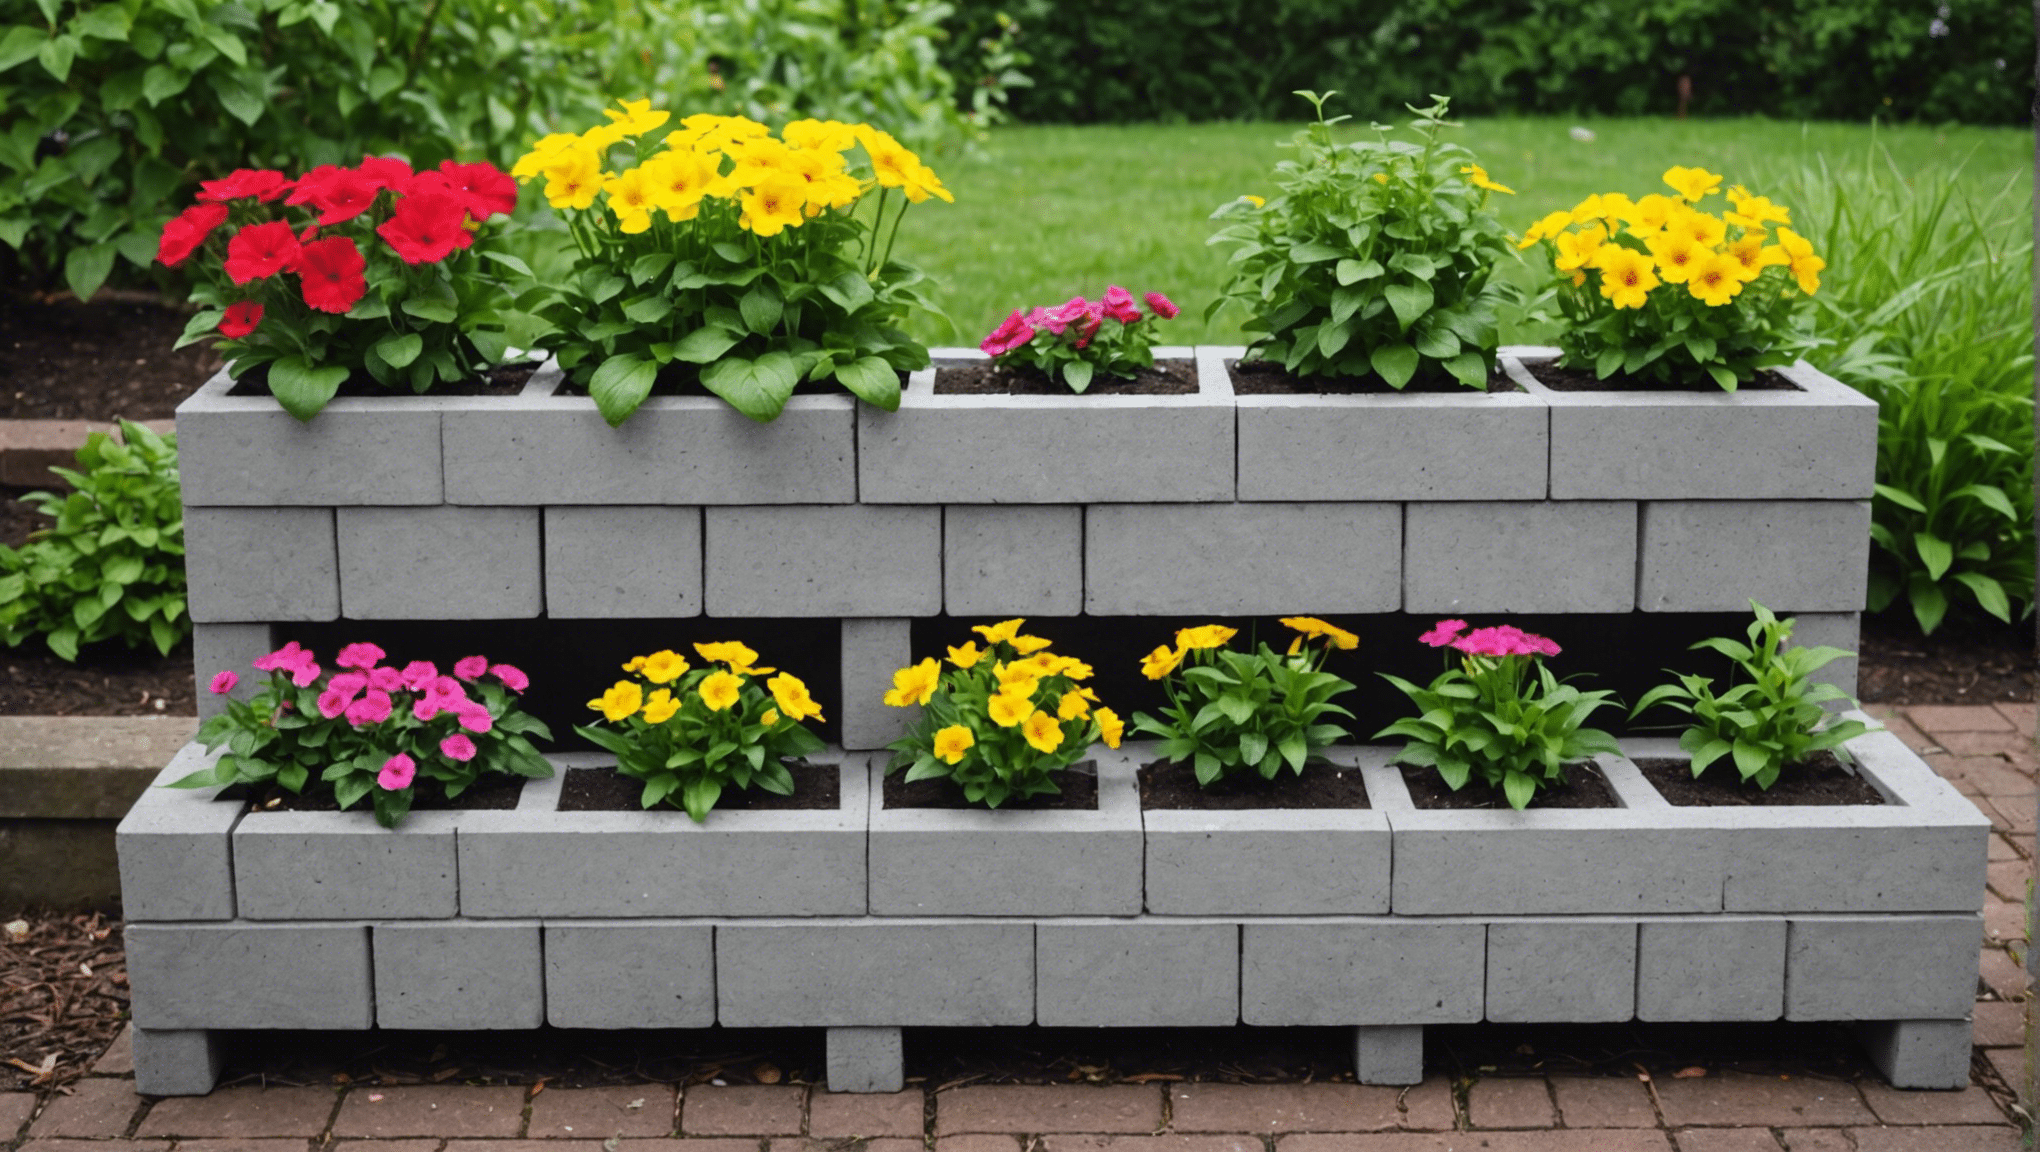 discover impressive garden ideas using cinder blocks to elevate your outdoor space with style and creativity.